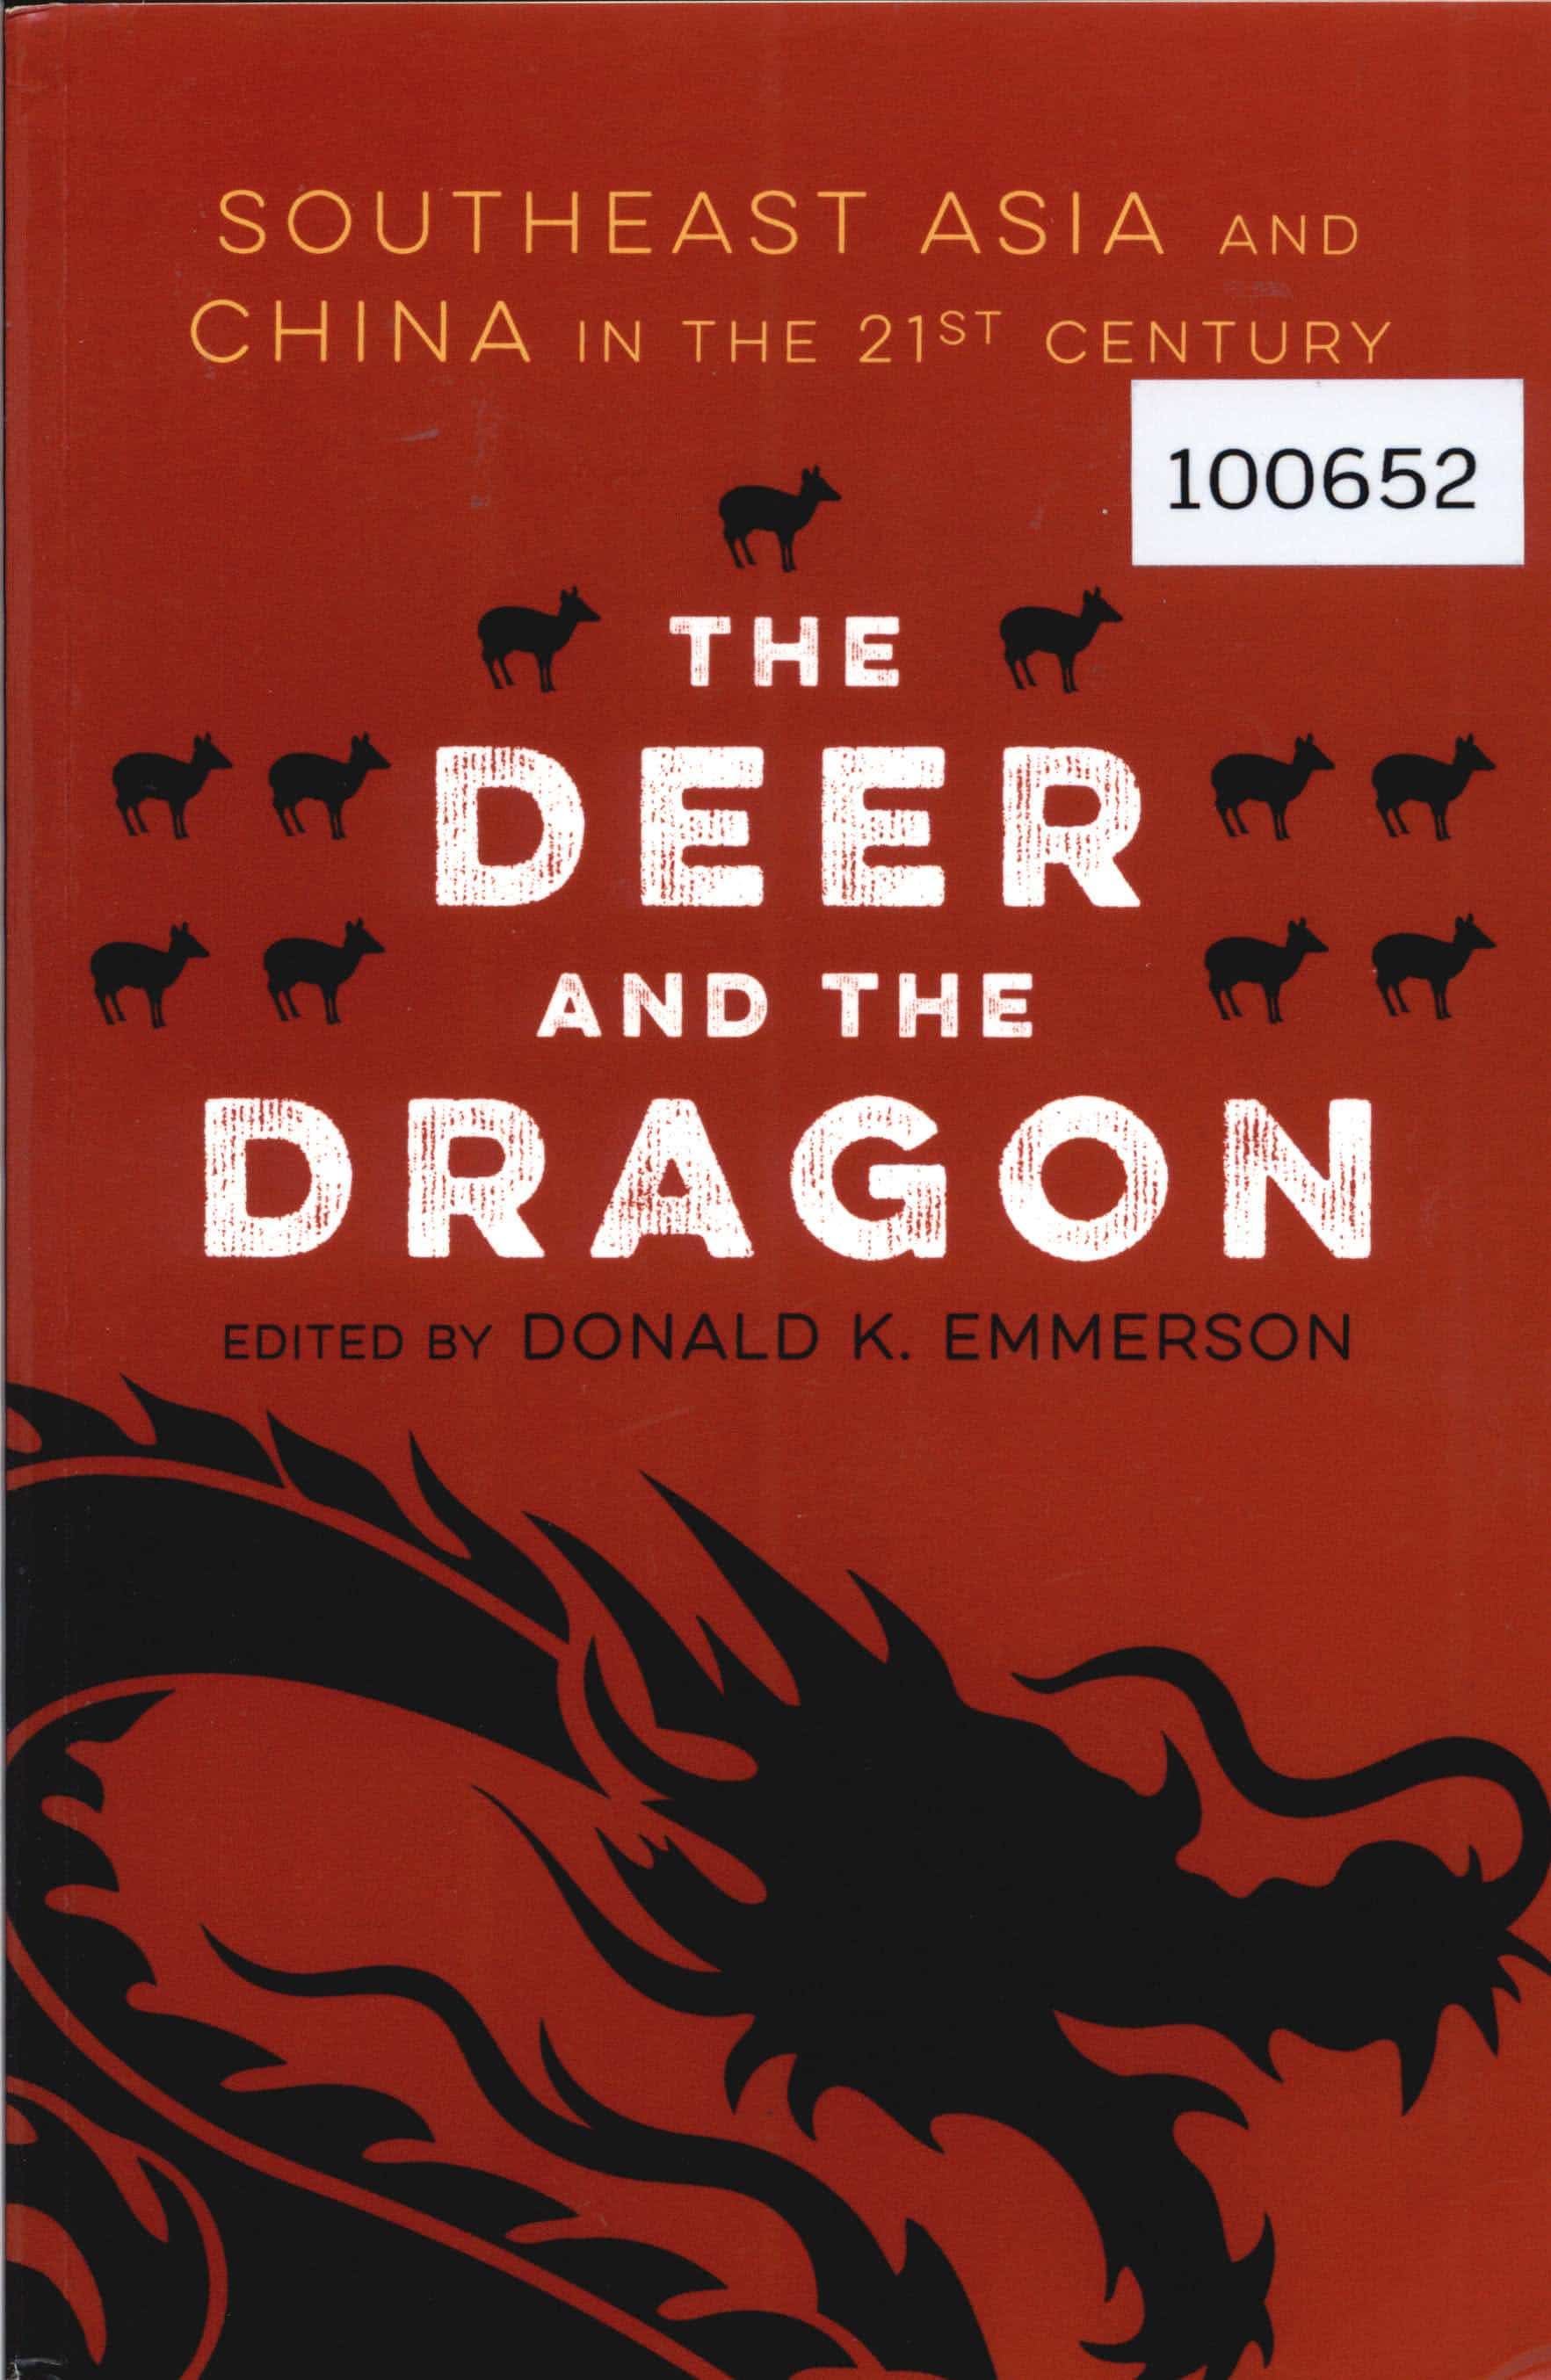 The Deer and the Dragon: Southeast Asia and China in the 21st Century